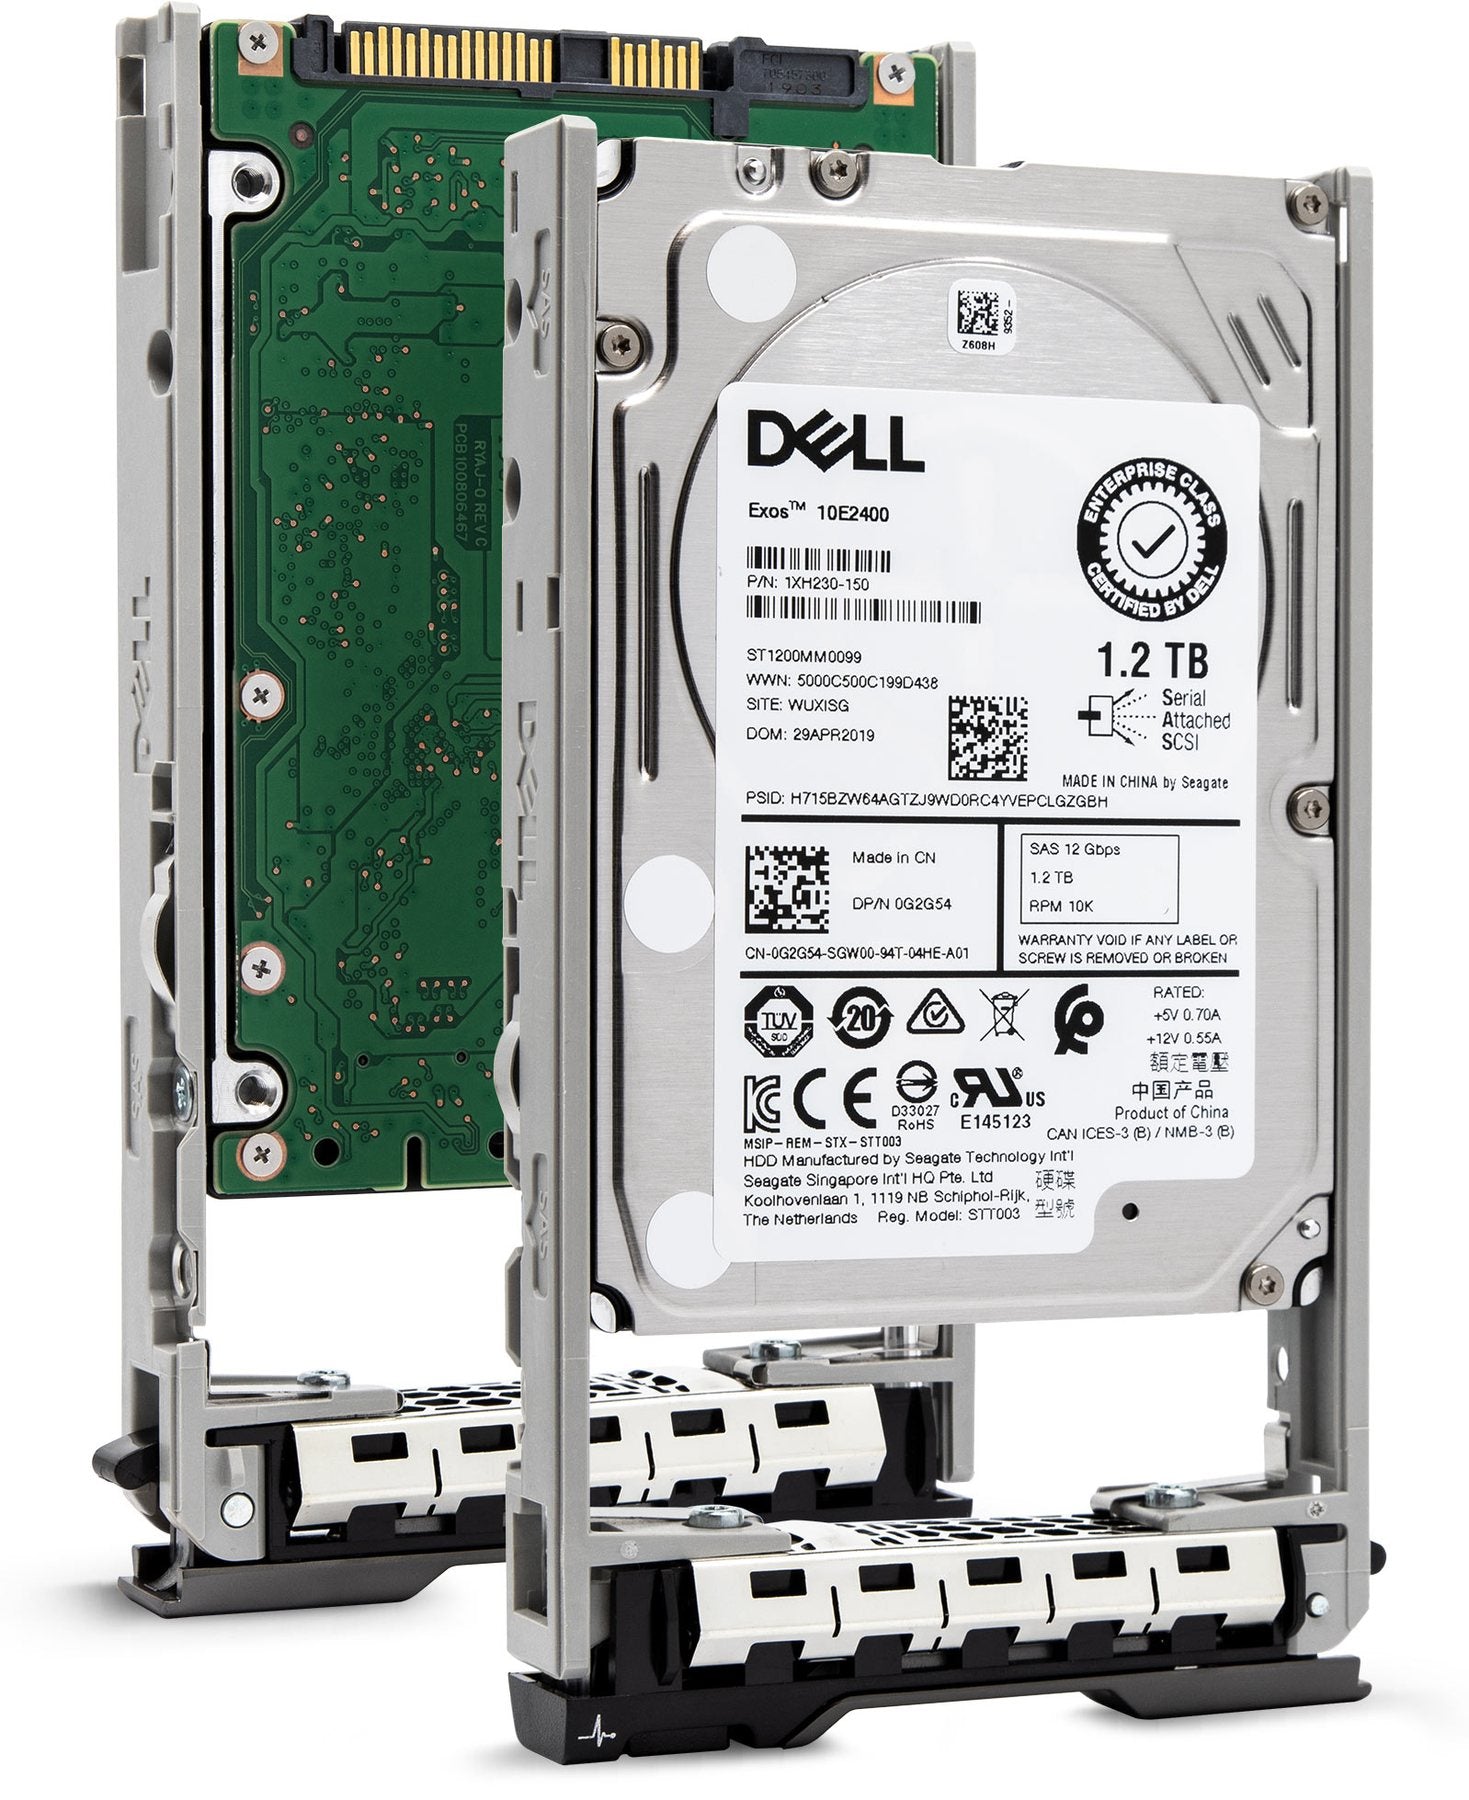 Dell G13 FY96C 1.2TB 10K RPM SAS 12Gb/s 512n 2.5" Manufacturer Recertified HDD